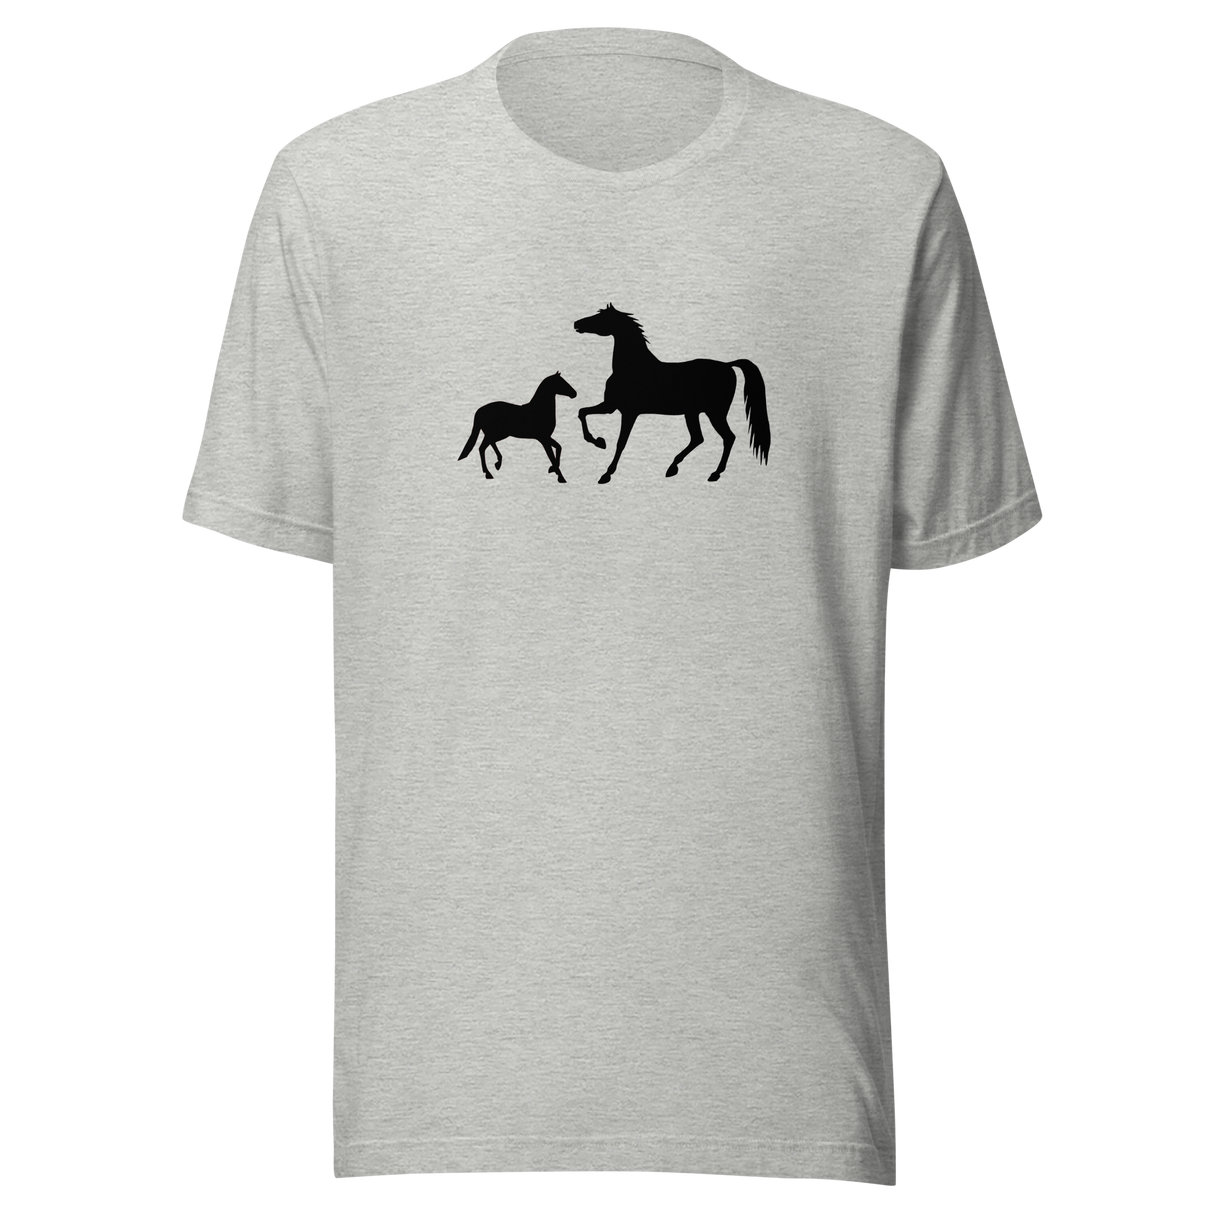 two-horses-horse-tee-silhouette-t-shirt-animal-tee-farm-t-shirt-equestrian-tee#color_athletic-heather